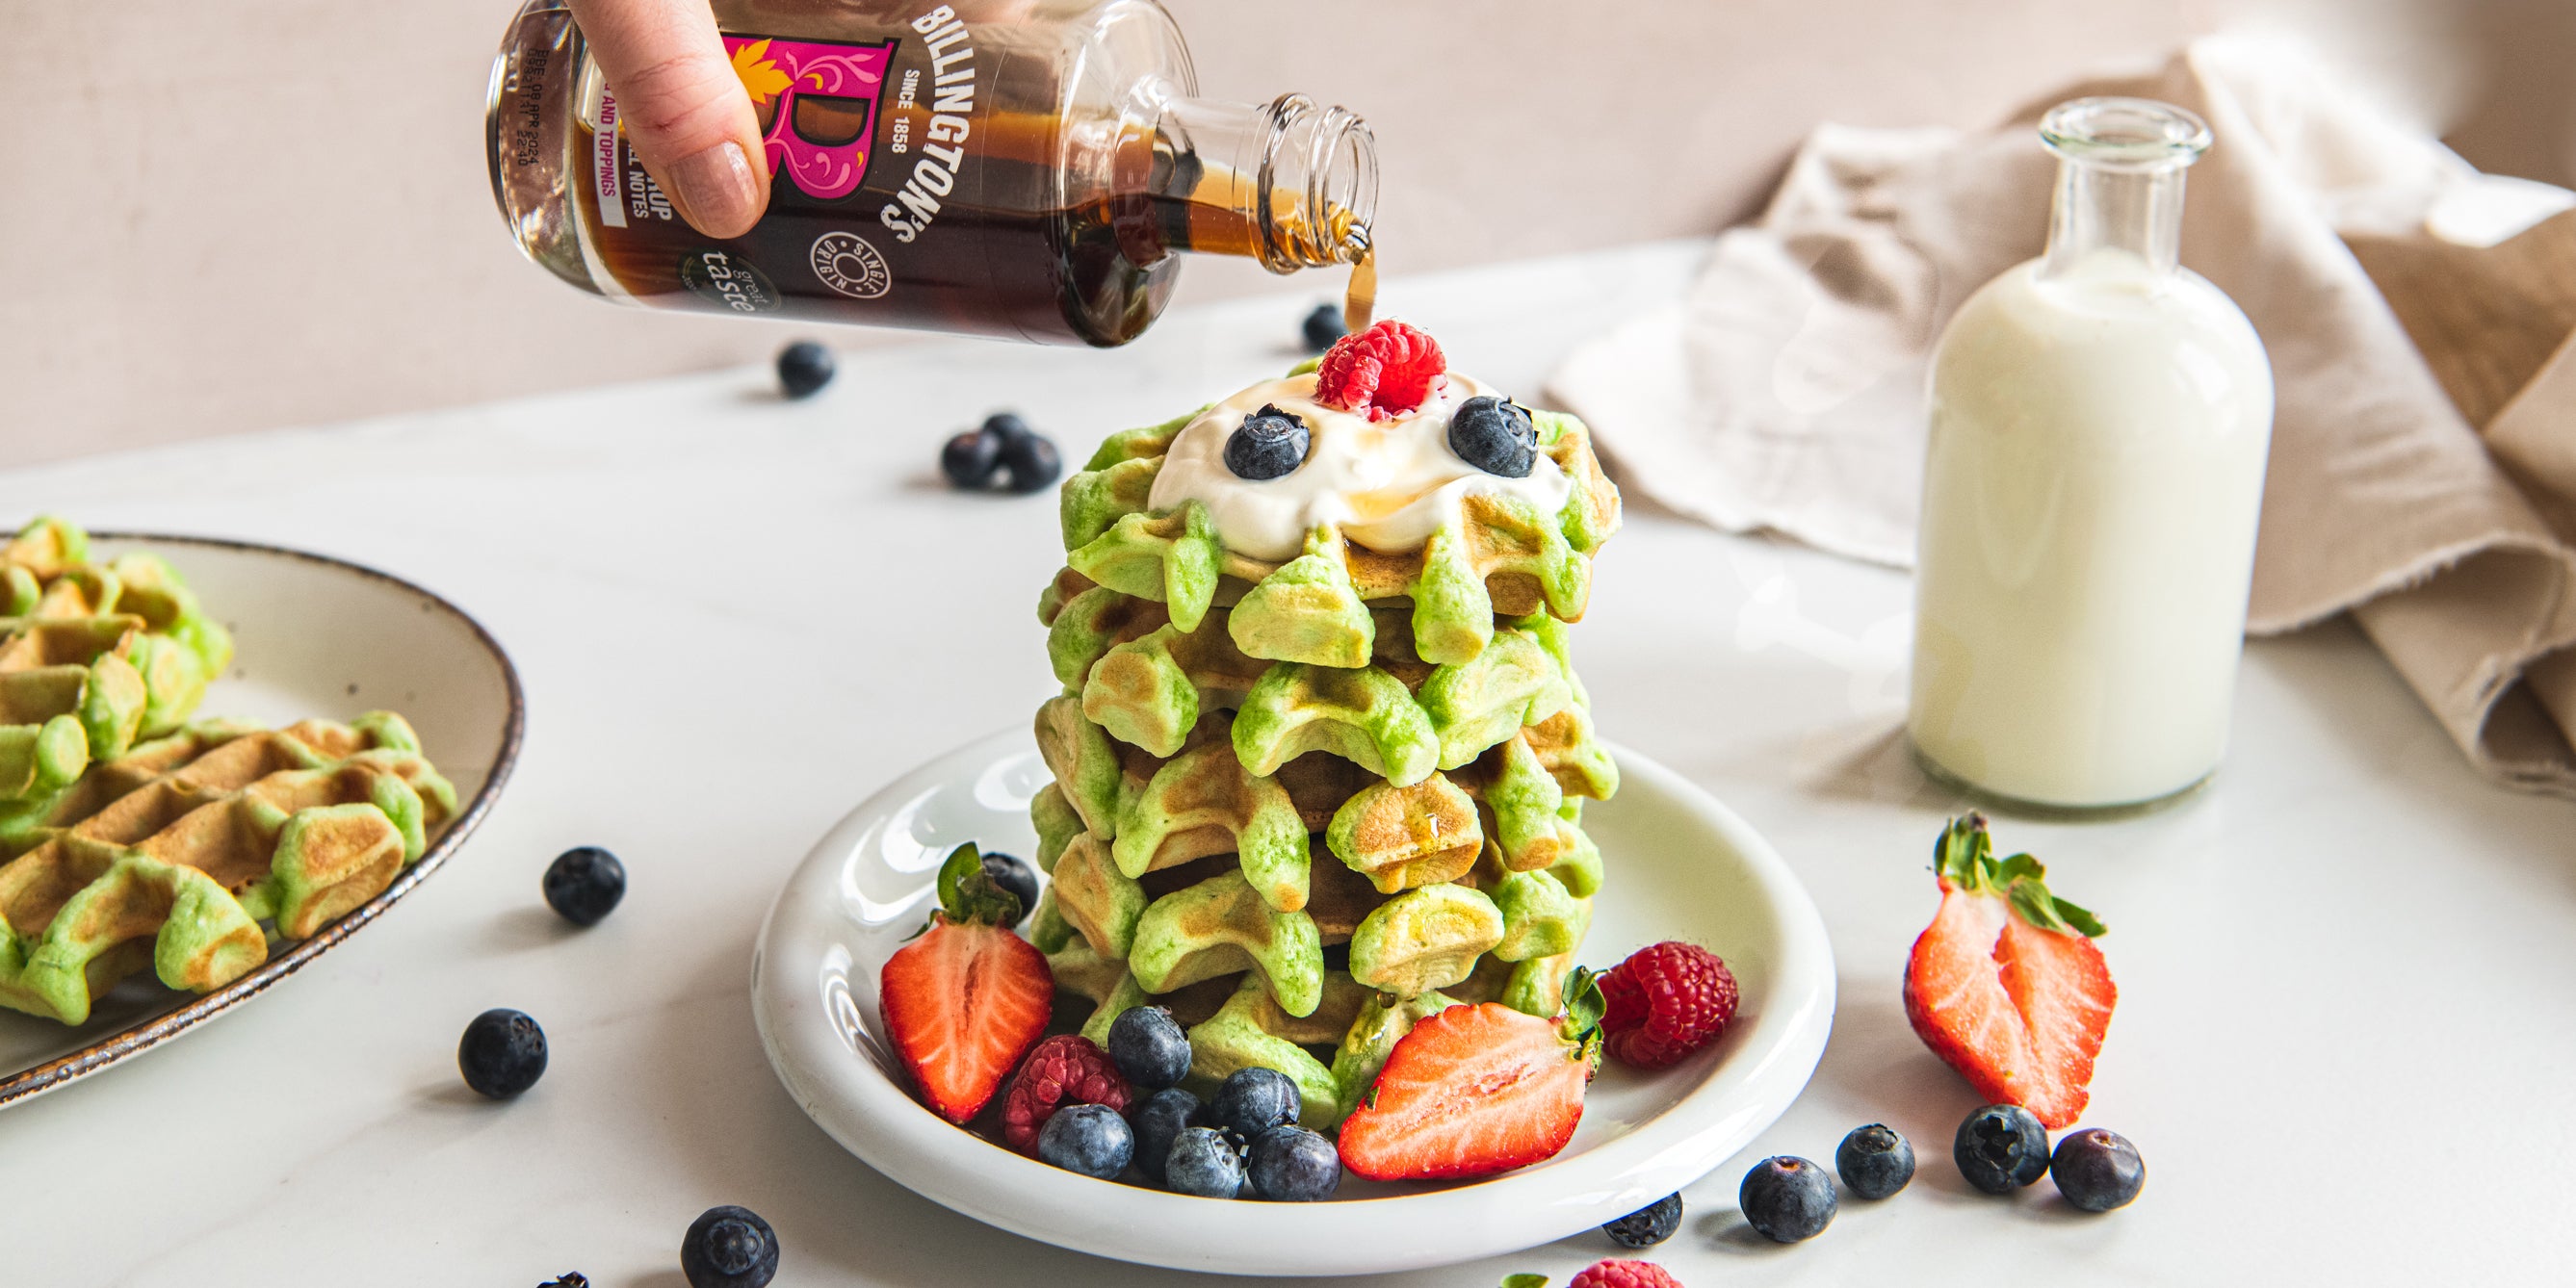 A fresh stack of green Pandan Waffles sprinkled with berries and being drizzled with Billington's maple syrup